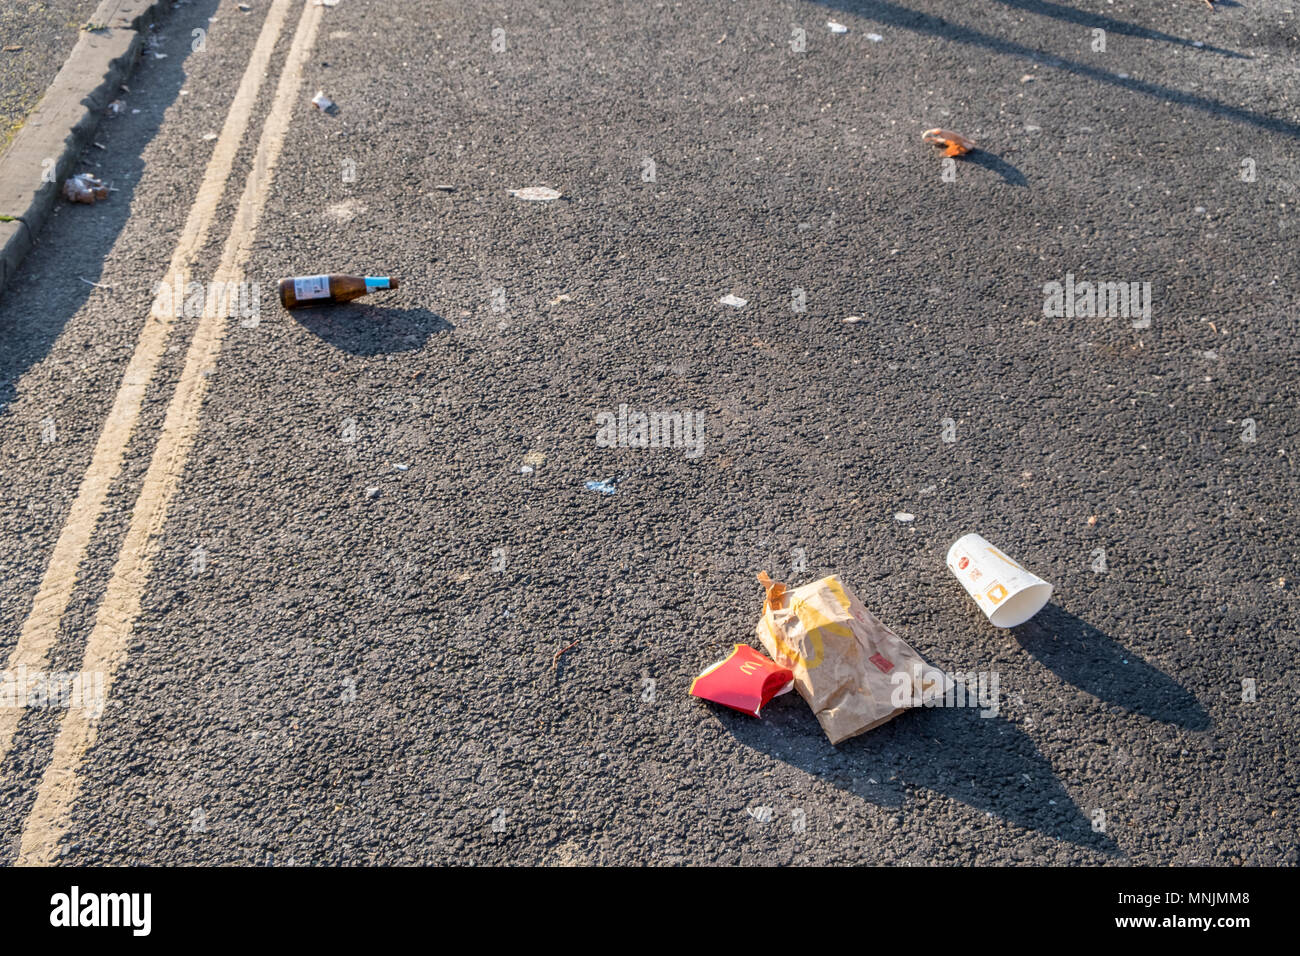 Litter on a road. Fast food waste, drinks containers and other rubbish left on the roadside, Nottingham, England, UK Stock Photo